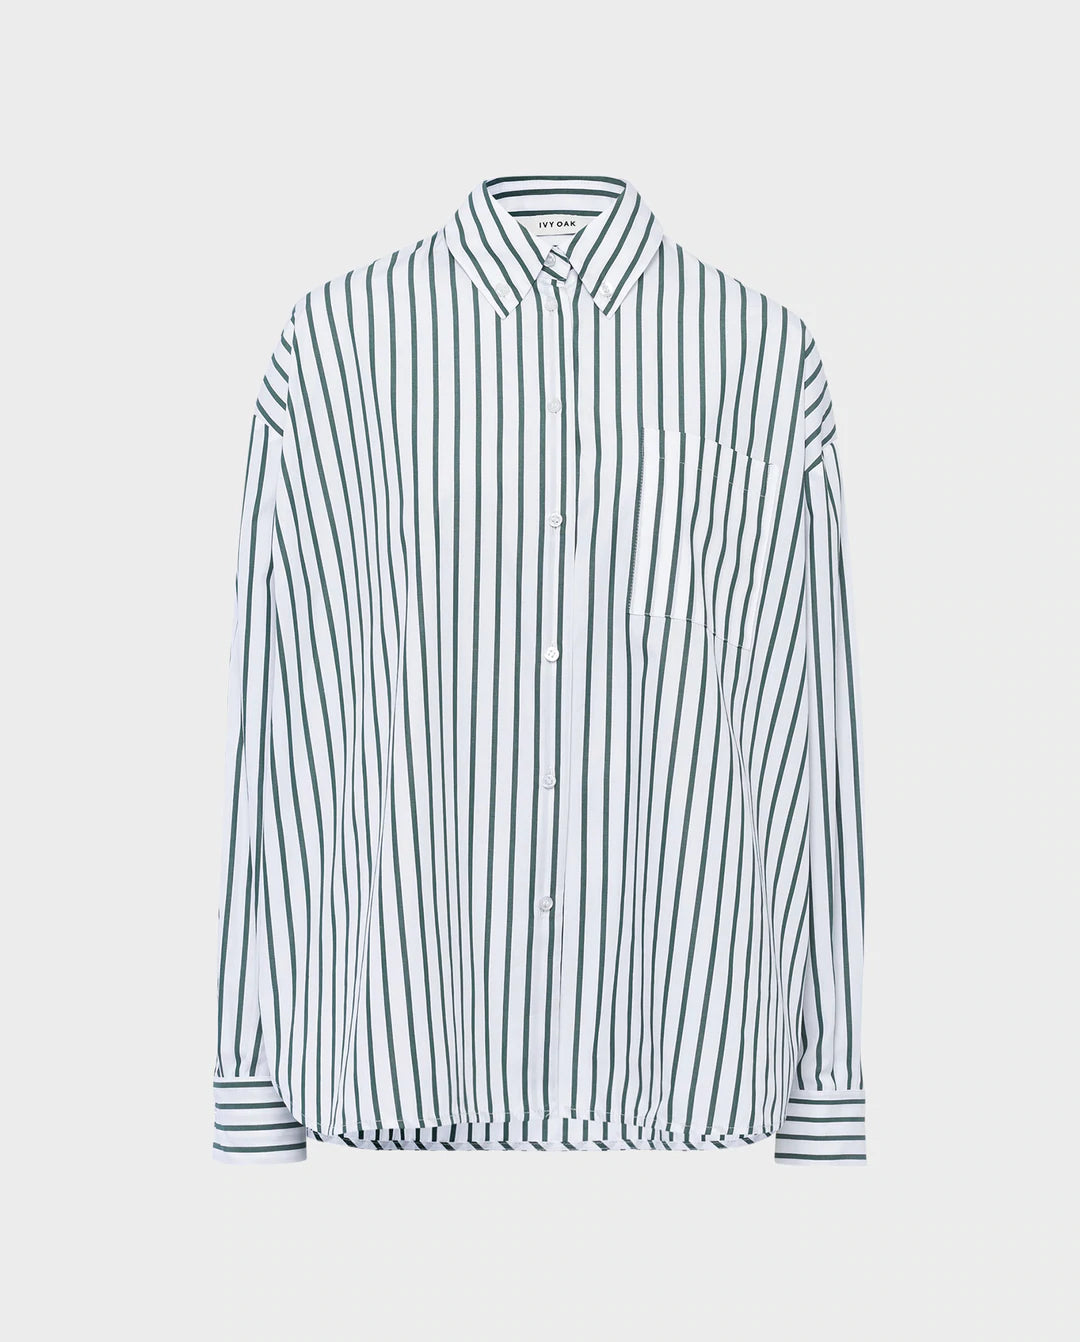 Bethany Lilly Blouse in pine forest stripe